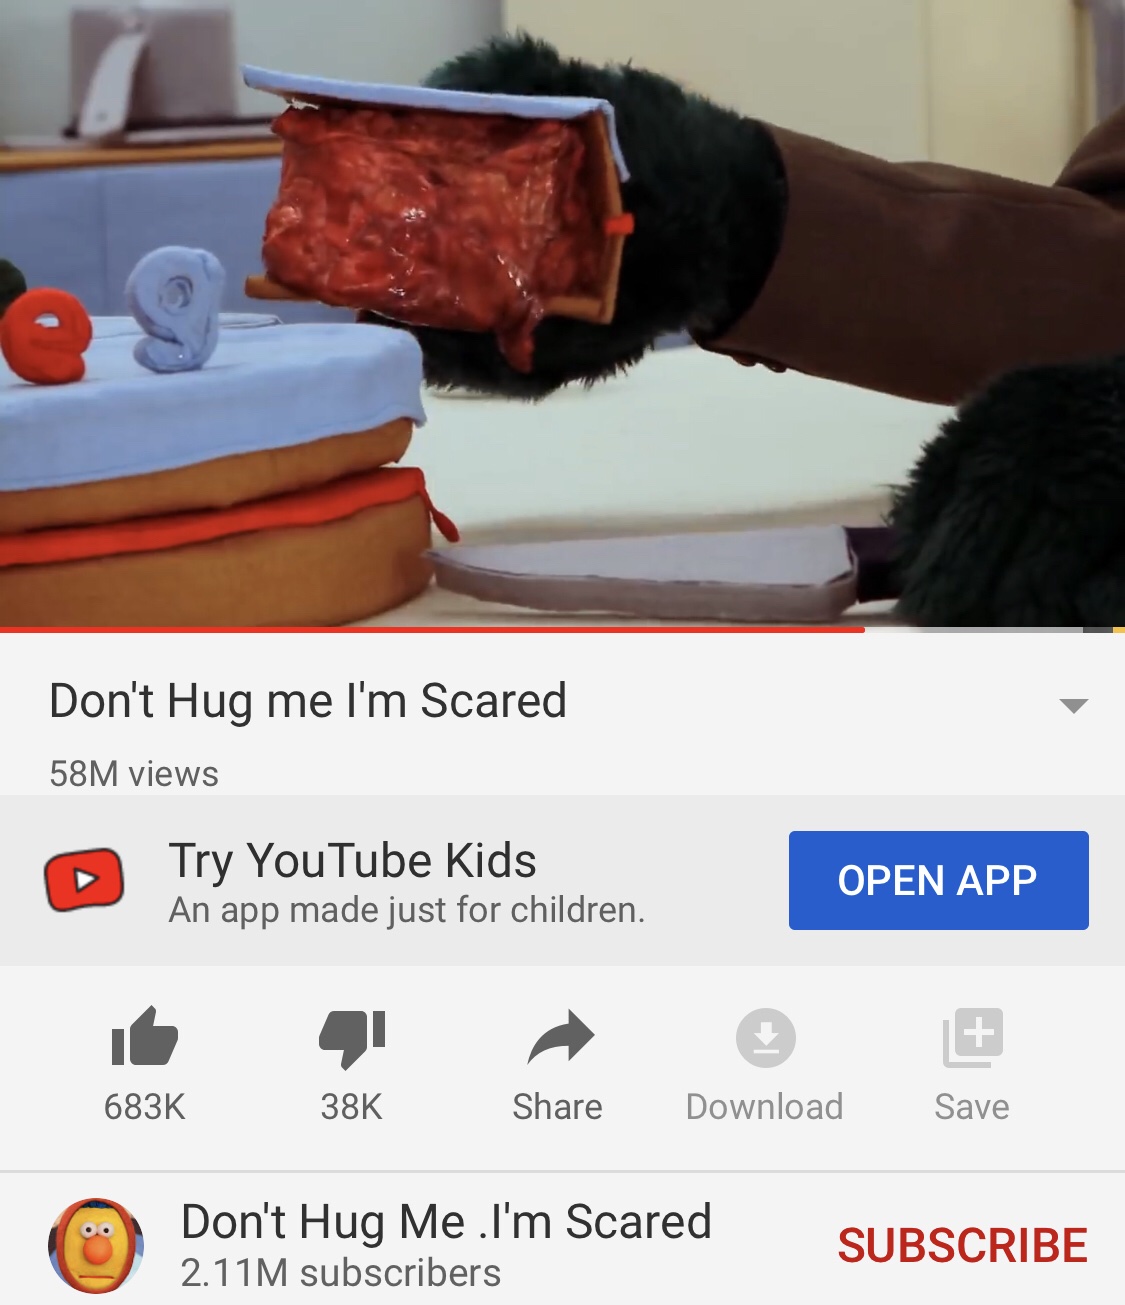 Don't Hug me I'm Scared is a surreal horror-comedy video which features puppets and gruesome imagery including a cake made from internal organs (YouTube - <a href="https://www.youtube.com/watch?v=9C_HReR_McQ">Don't Hug me, I'm Scared</a>)